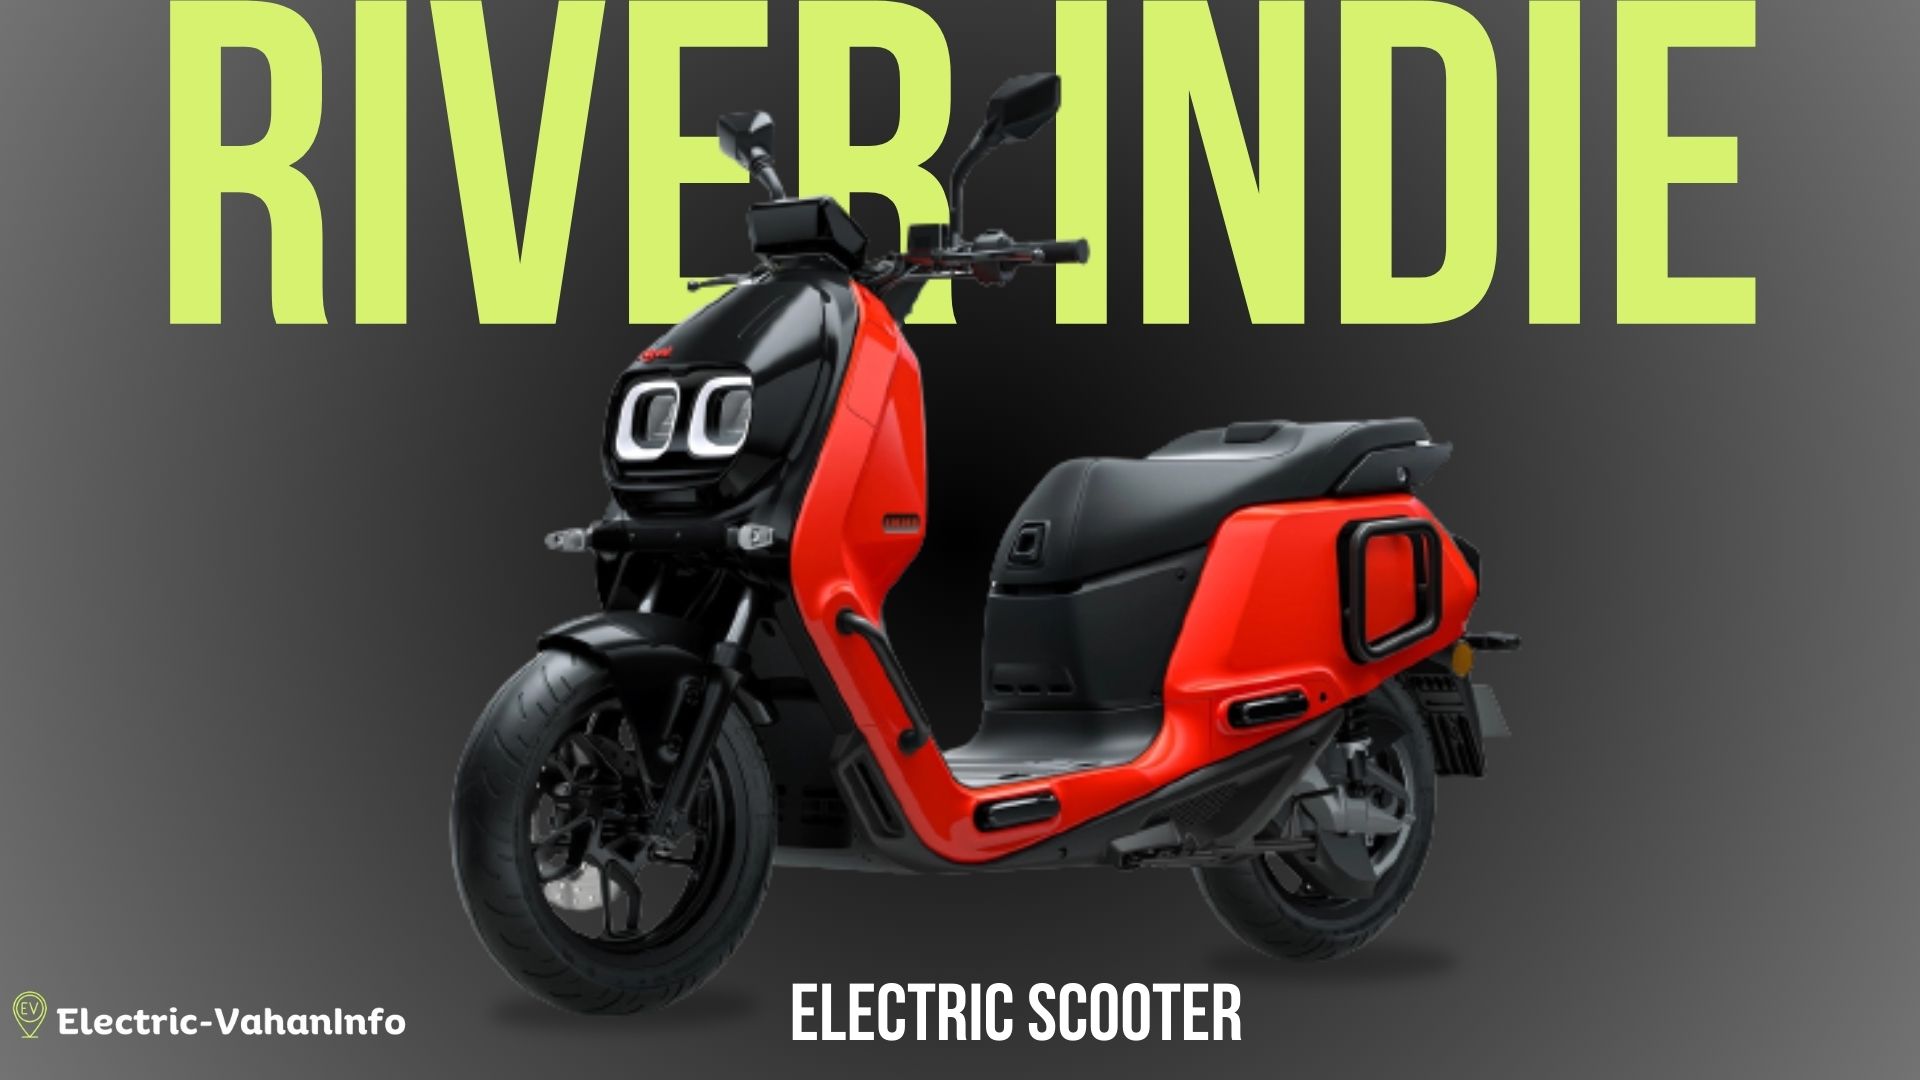 https://electric-vahaninfo.com/river-indie-electric-scooter-price-range-and-specifications/